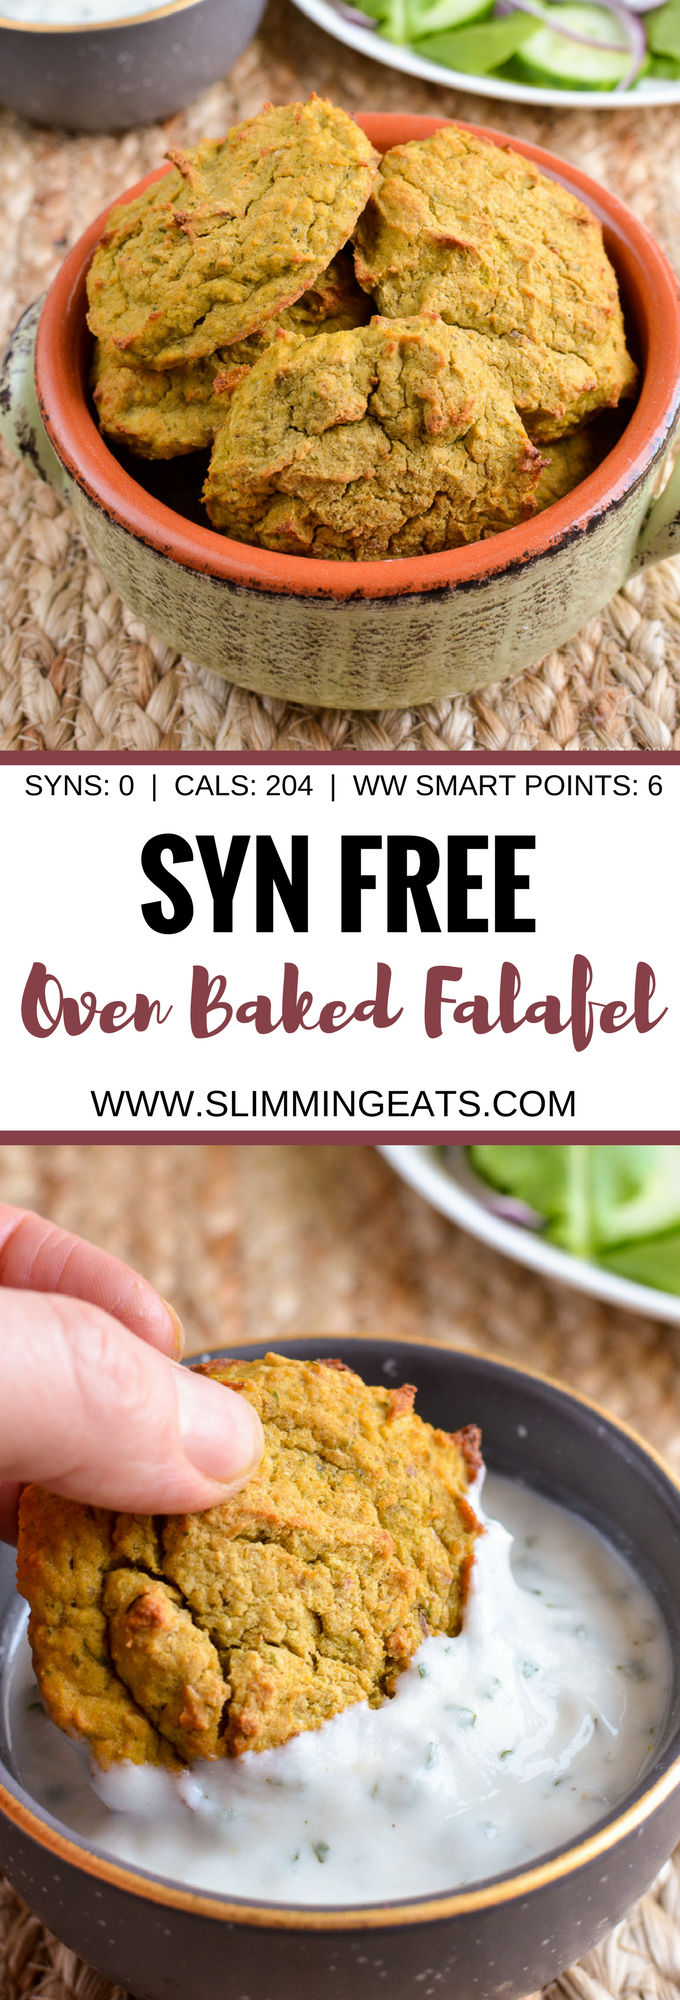 Slimming Eats Oven Baked Falafel - Gluten Free, Dairy Free, Vegetarian, Slimming World and Weight Watchers friendly